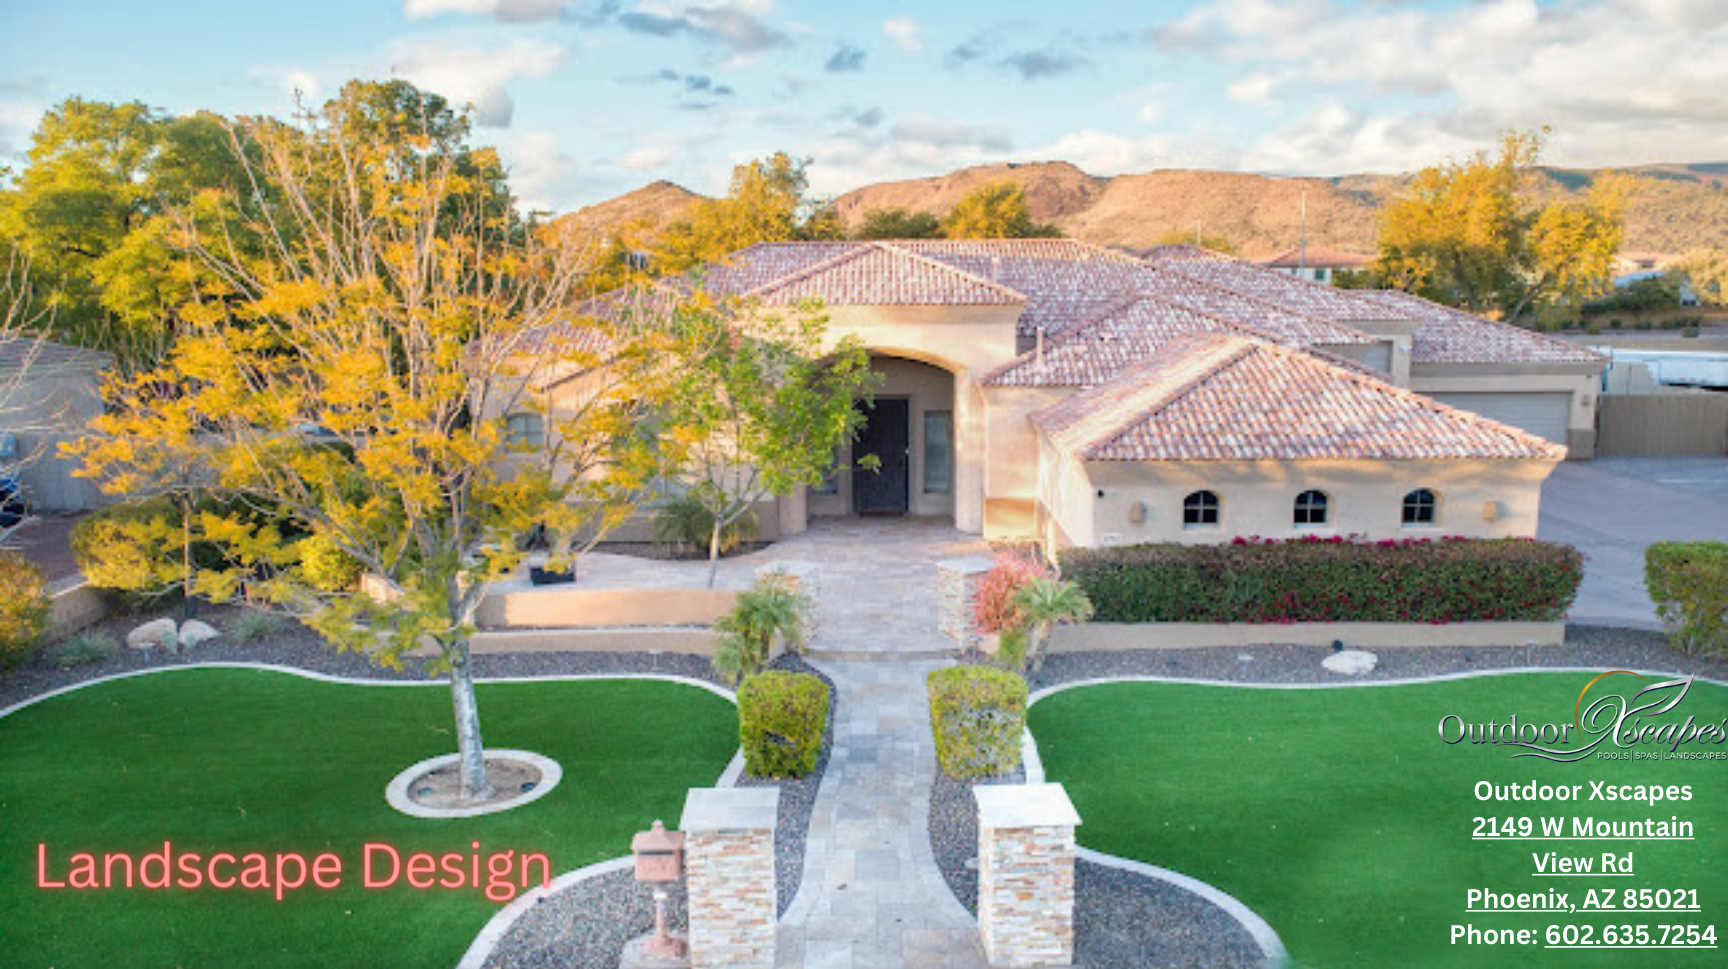 Outdoor Xscapes Launches New Website to Elevate Landscape Design Experience in Phoenix, AZ